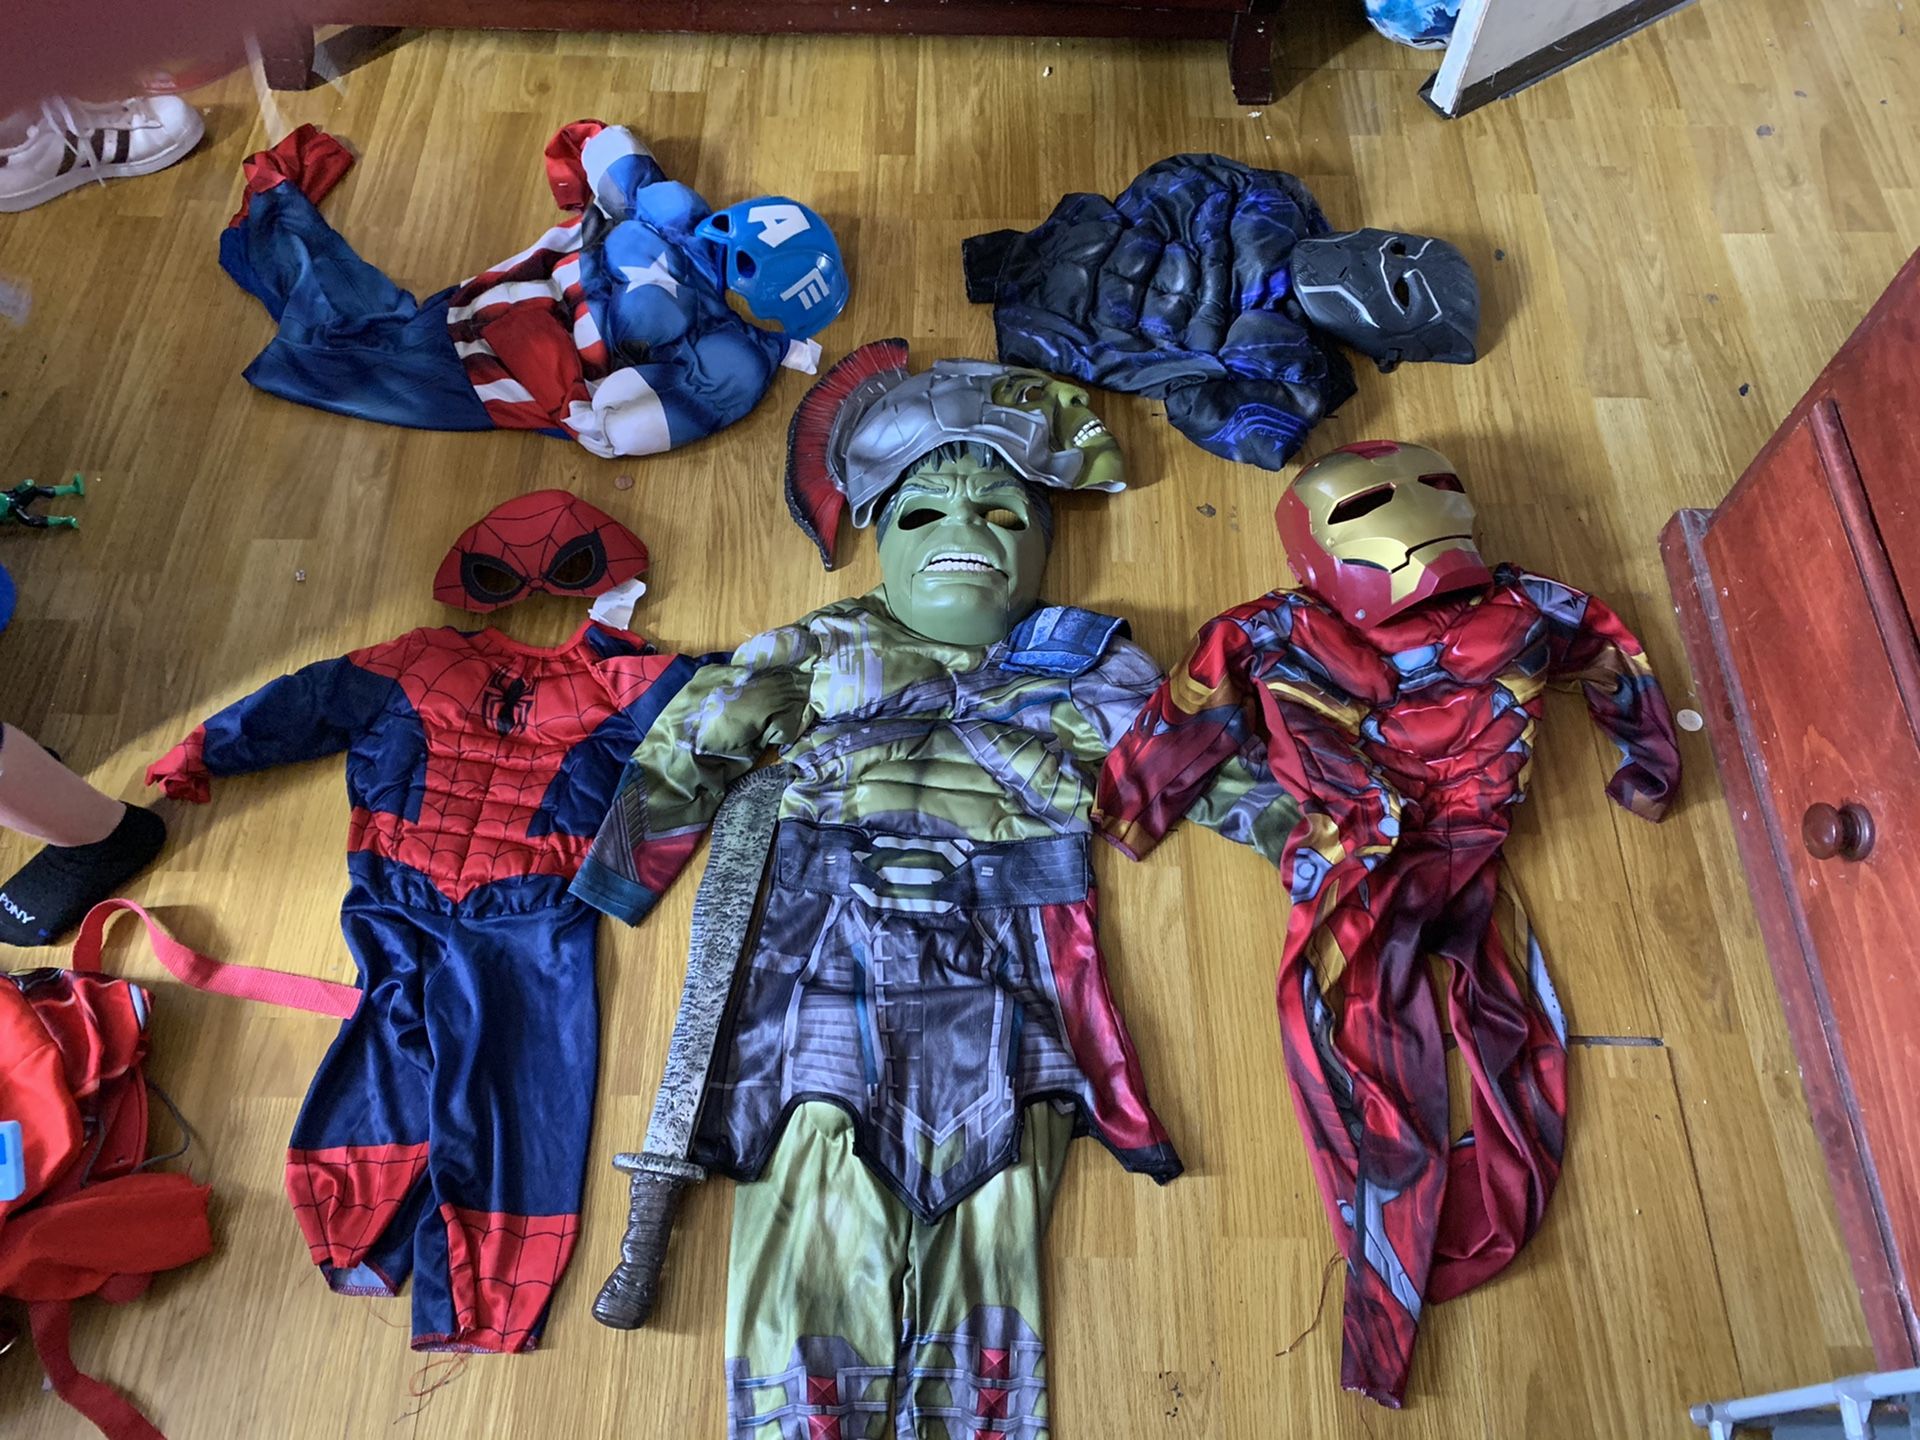 Costumes for kids size 3 used one time comes with mask they Are in agood condition